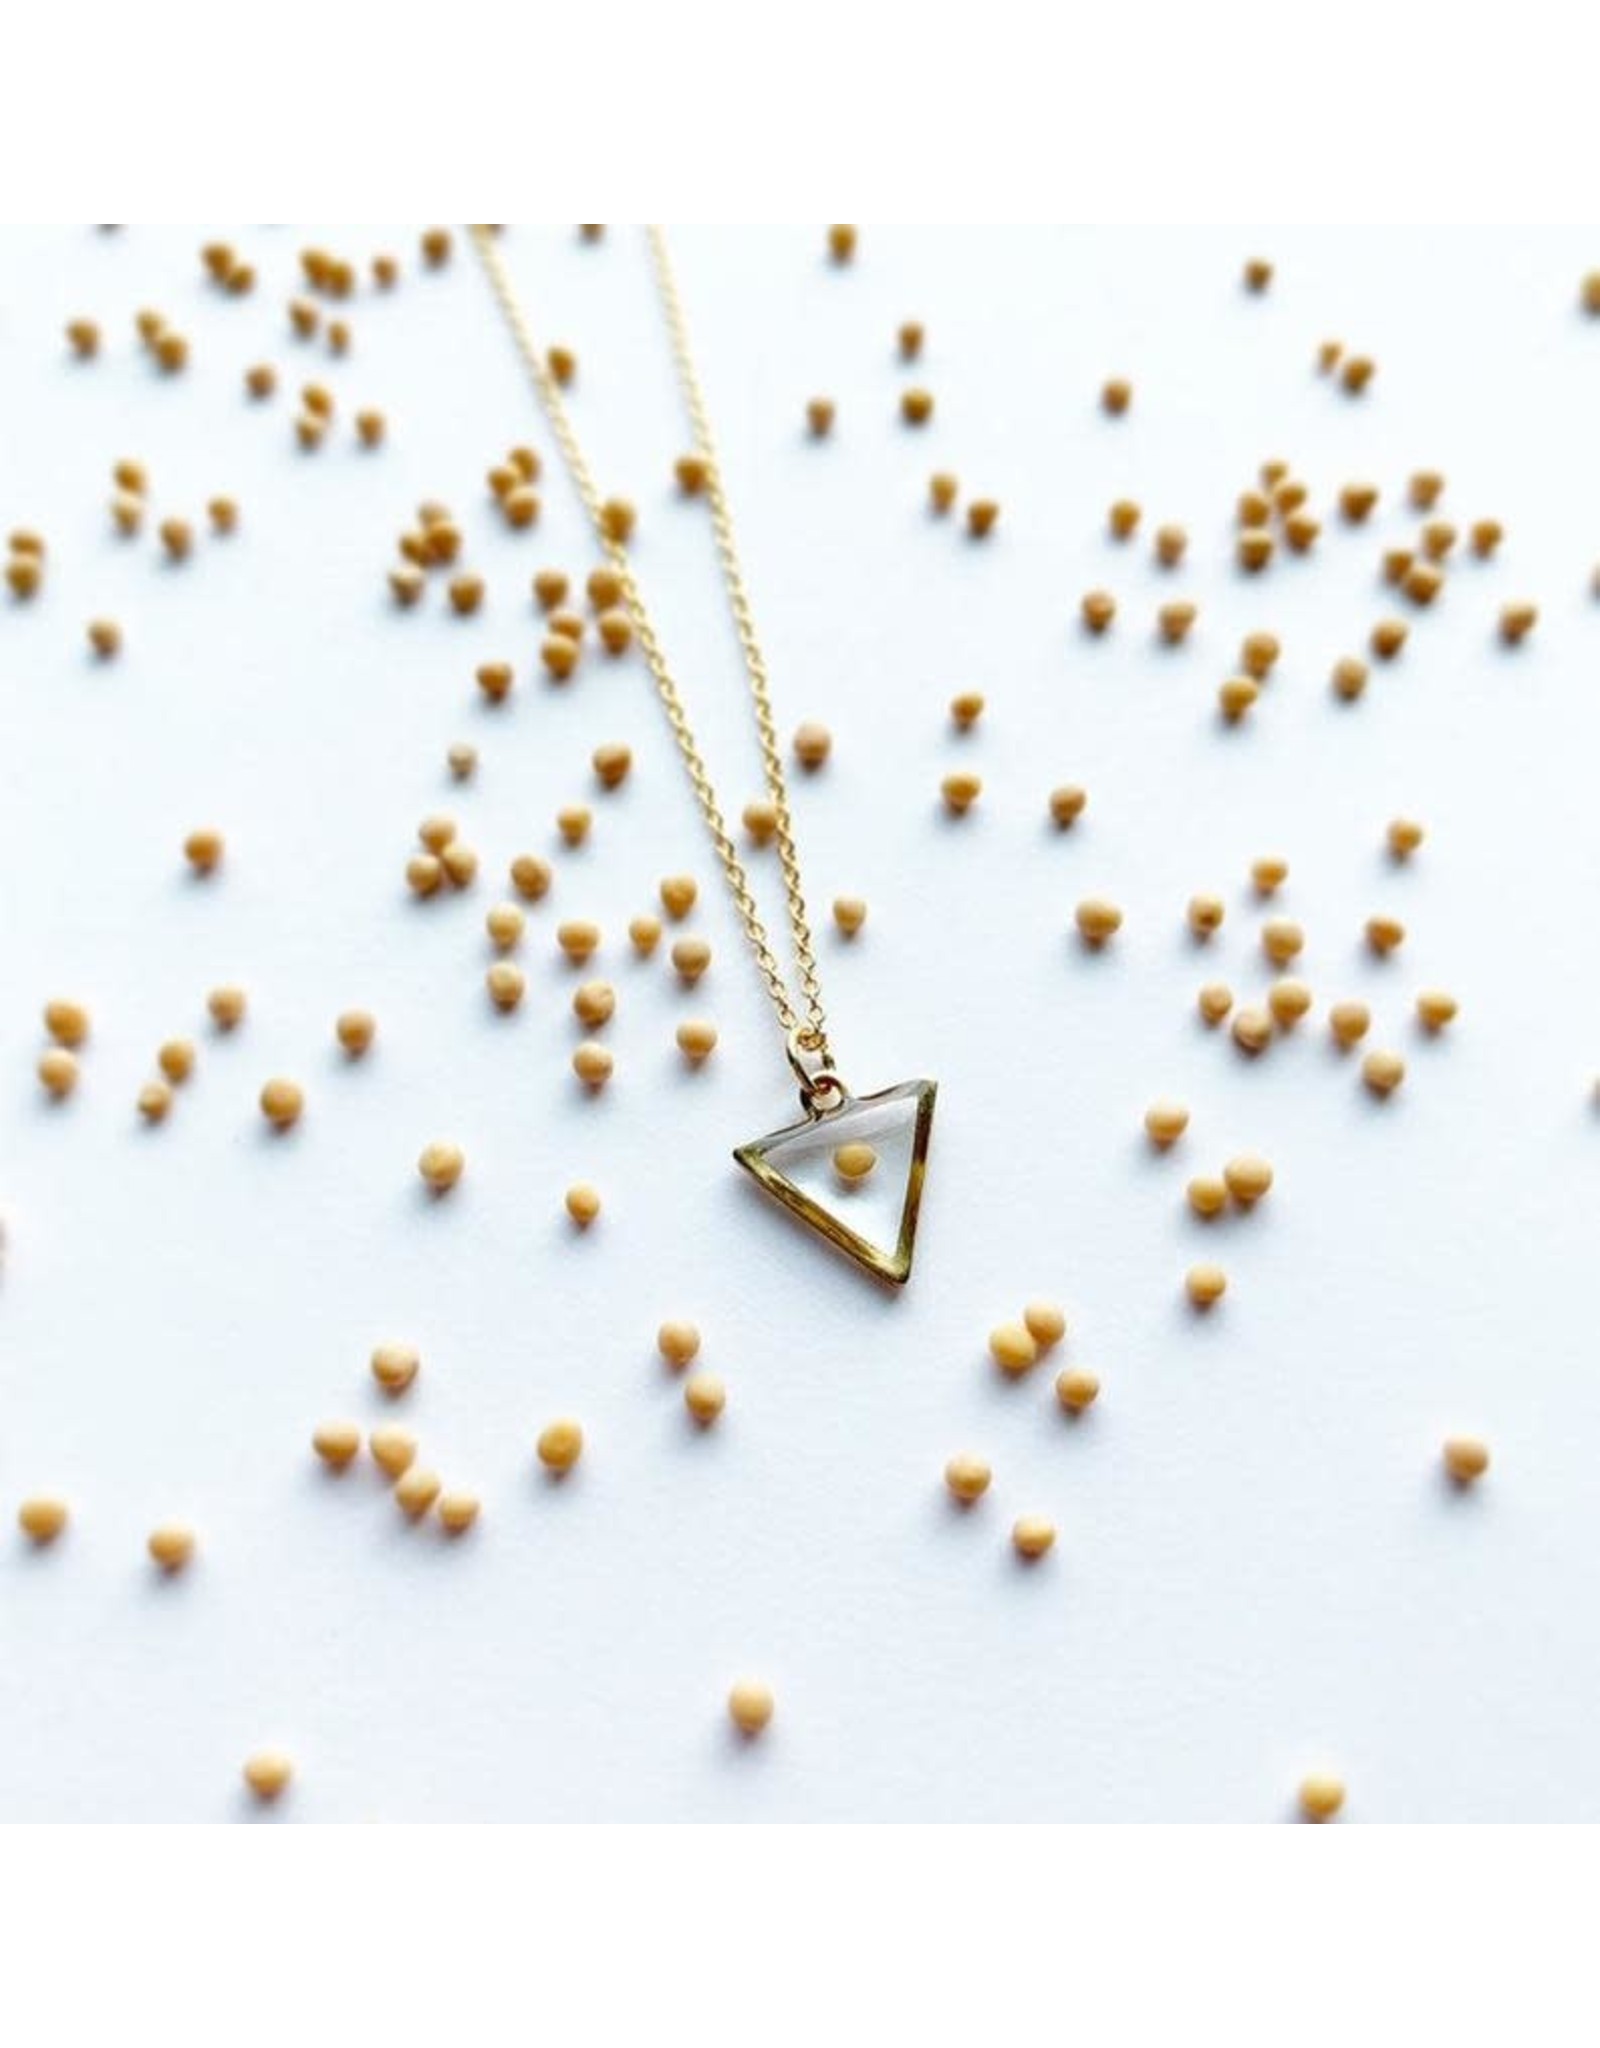 Seeds & Mountains Bible Verse Necklace - Faith (Mustard Seed)